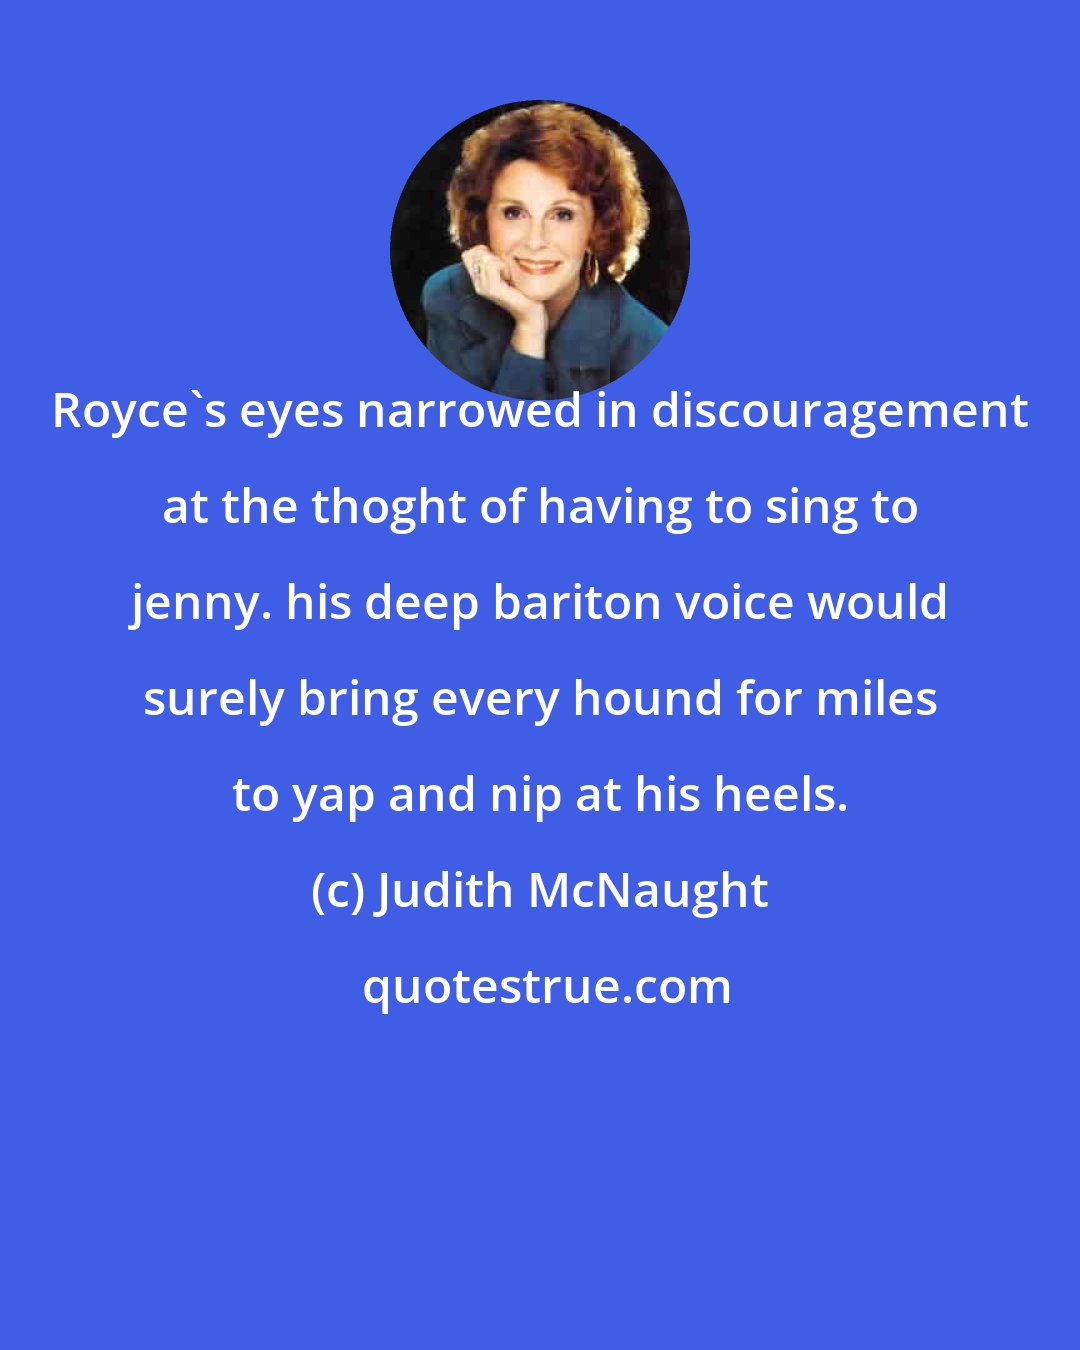 Judith McNaught: Royce's eyes narrowed in discouragement at the thoght of having to sing to jenny. his deep bariton voice would surely bring every hound for miles to yap and nip at his heels.